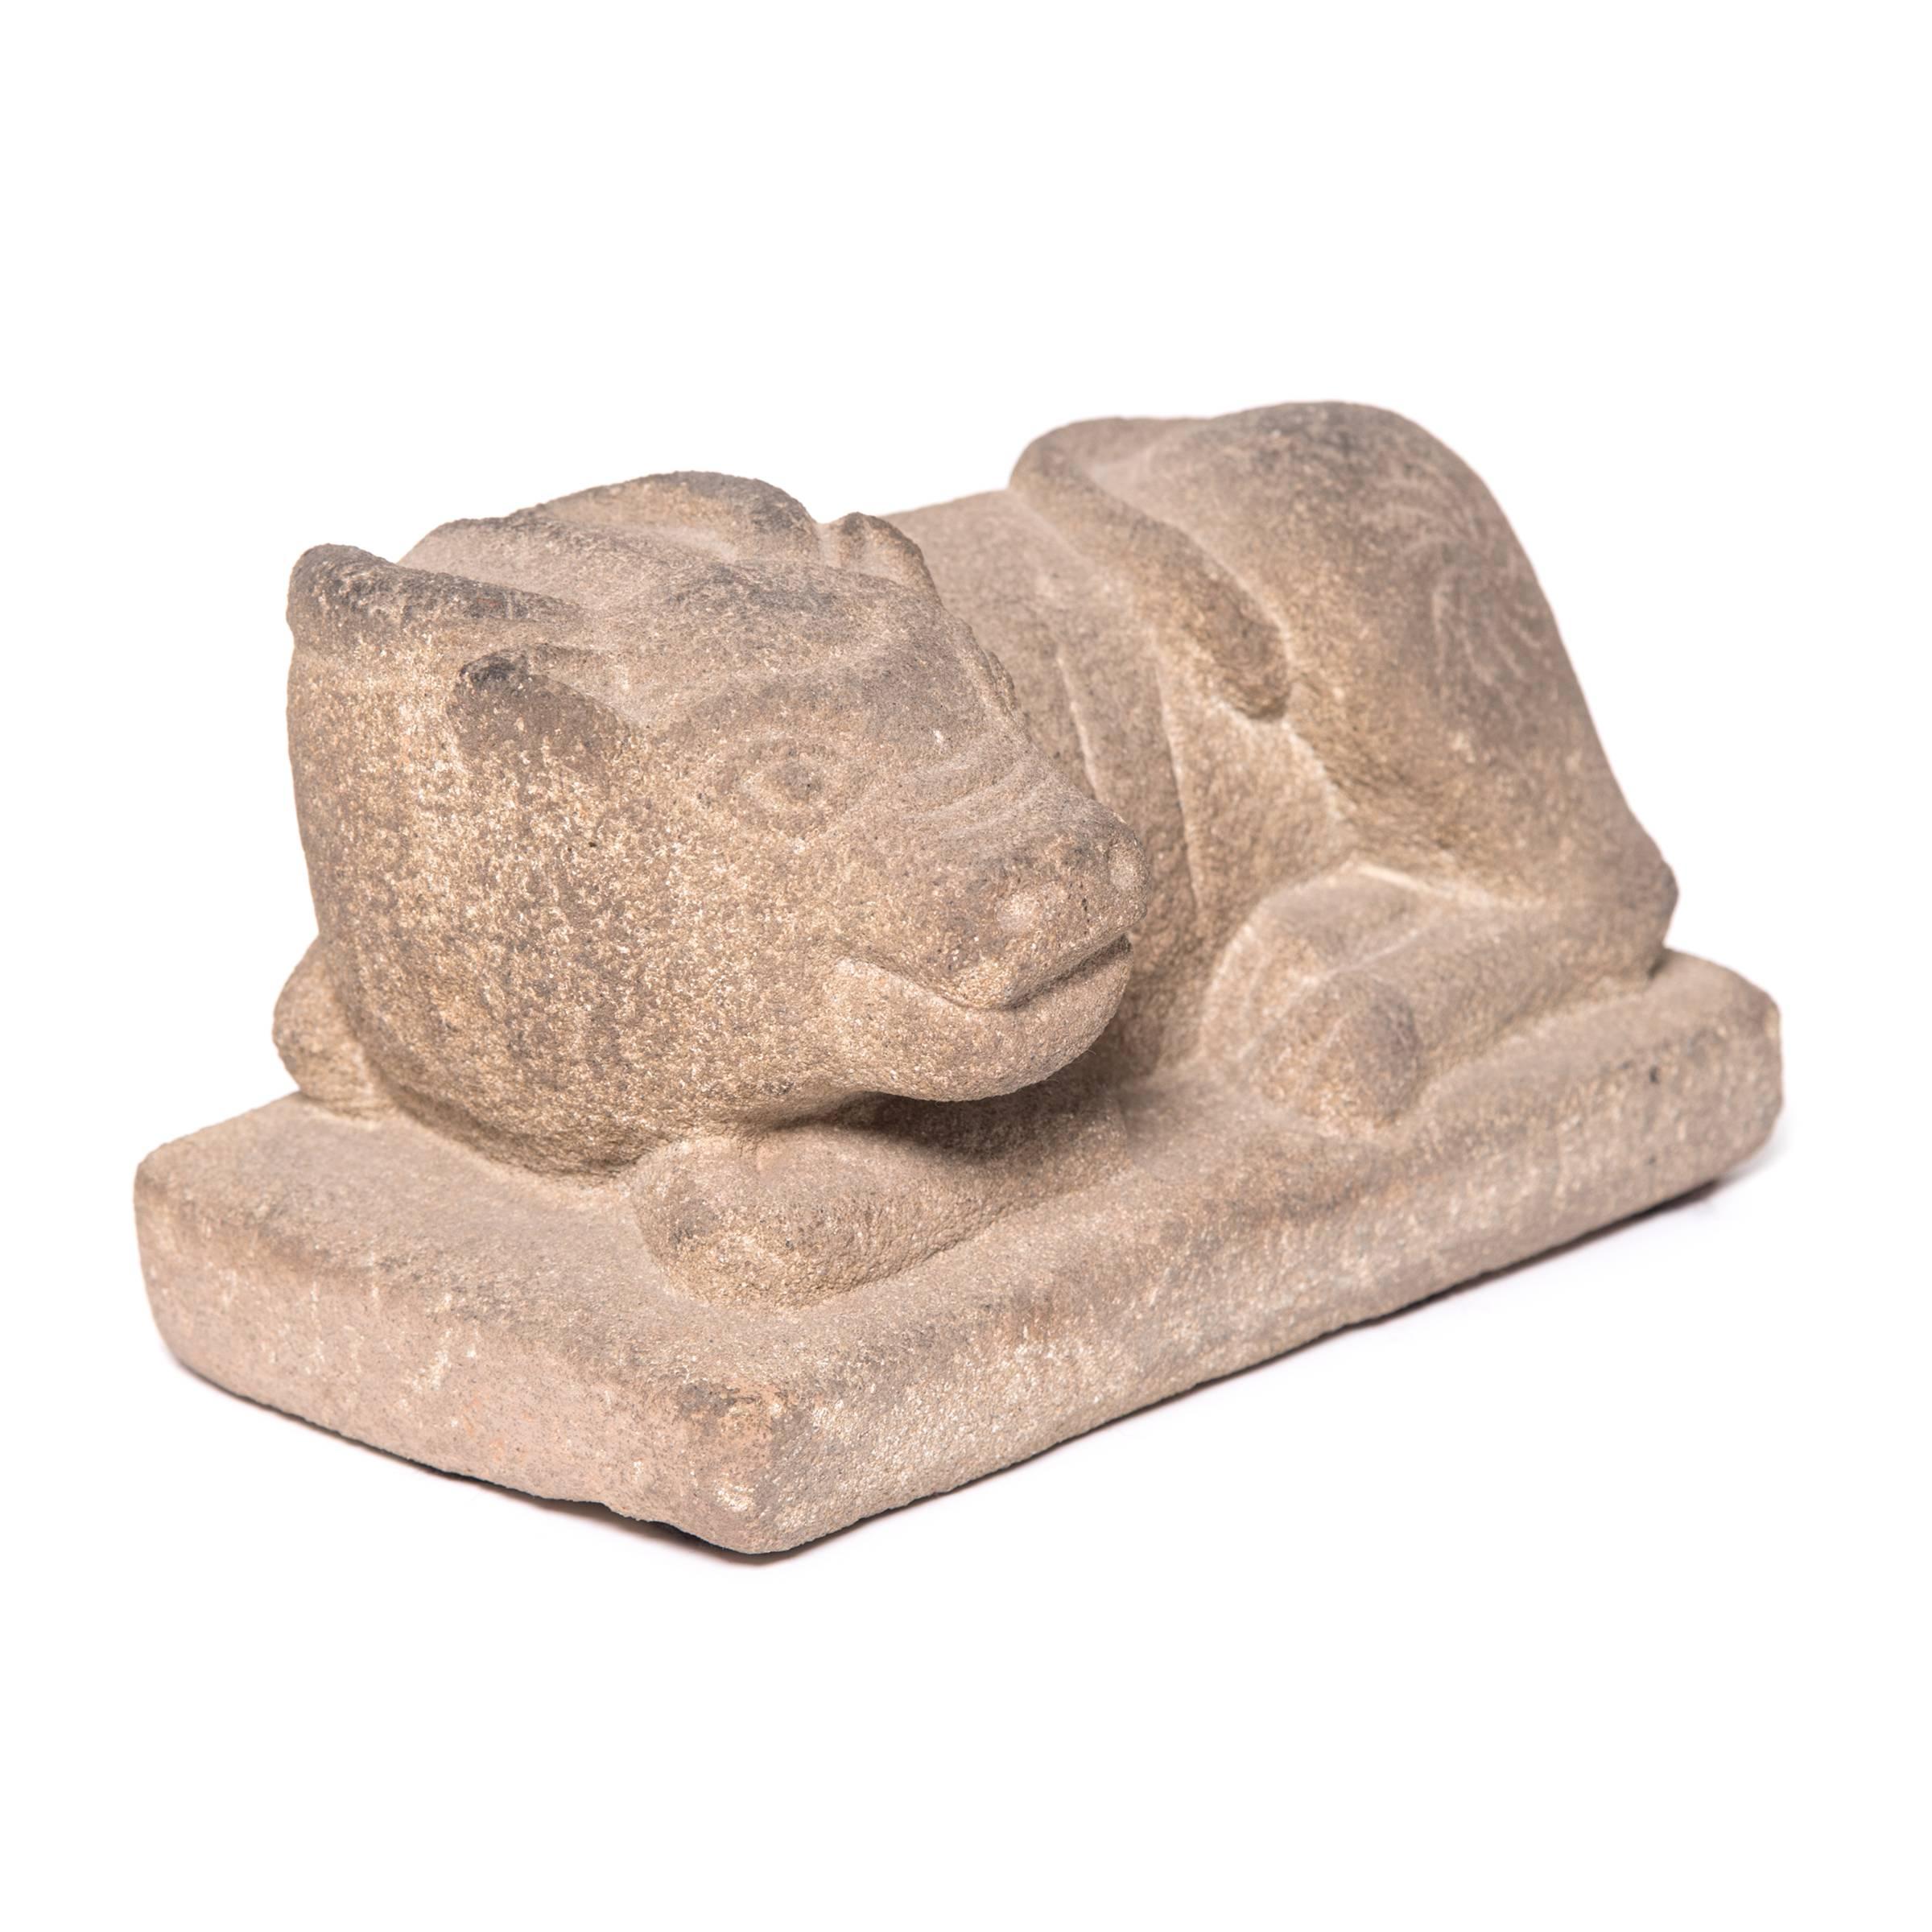 Originally thought to part of a shoemaker’s workshop, this stone weight actually used its heft in the nursery. A simple yet ingenious concept, the stone anchored the baby’s swaddling cloth to the bed so the child wouldn’t roll out. At rest just like